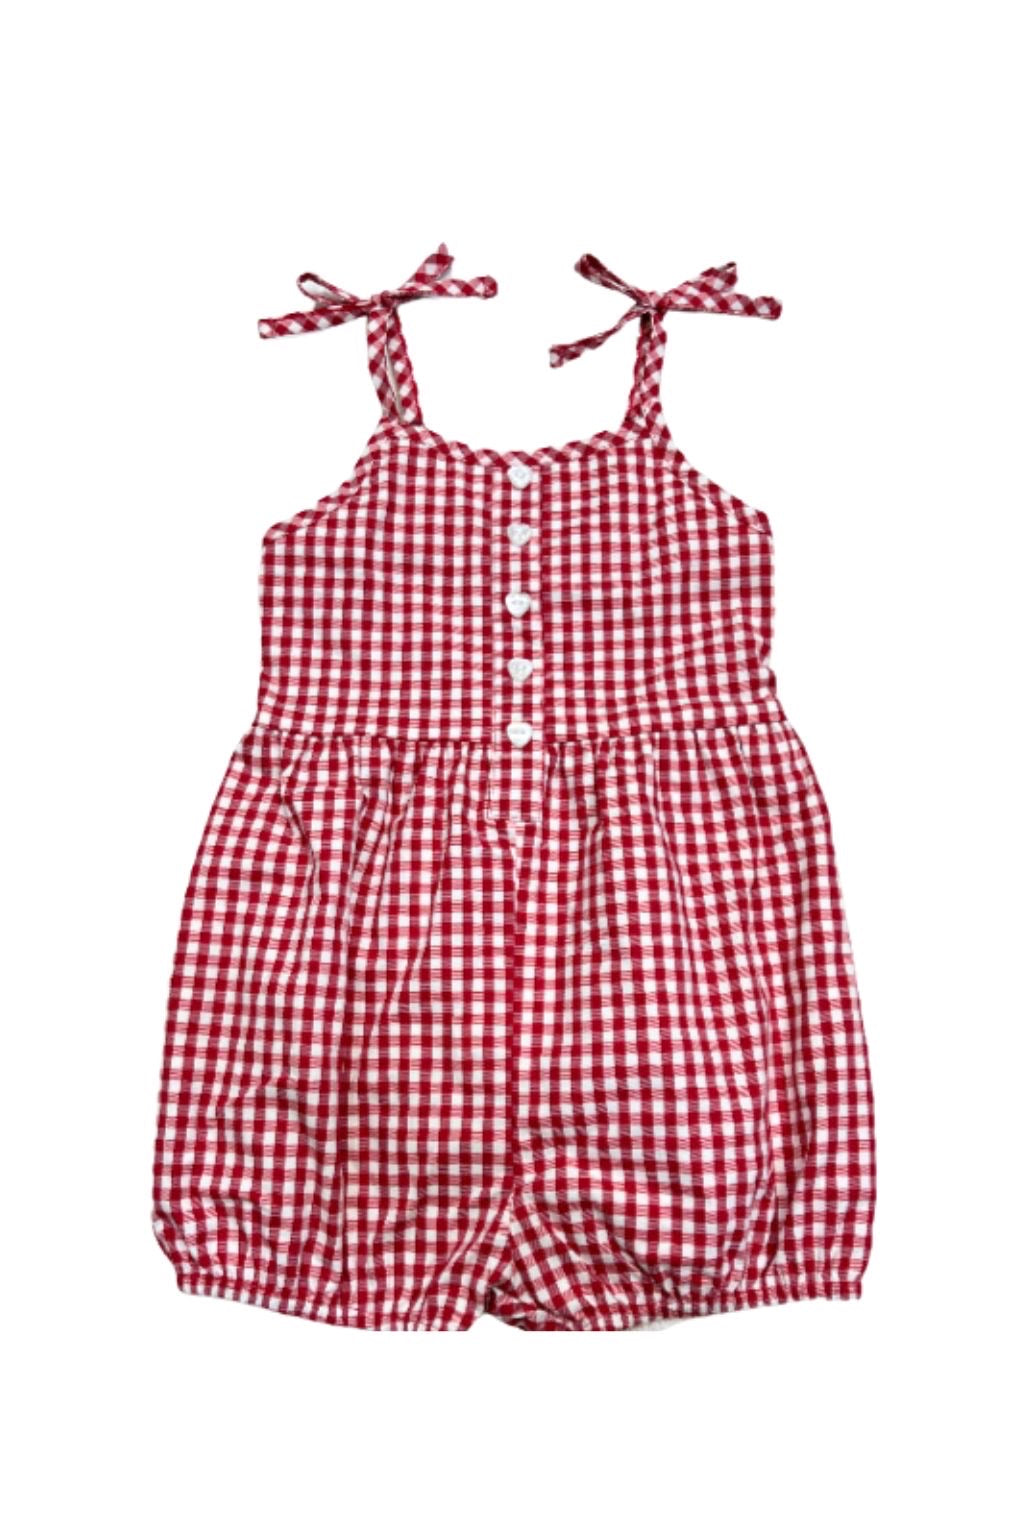 *PREORDER* Red Gingham Bubble Romper